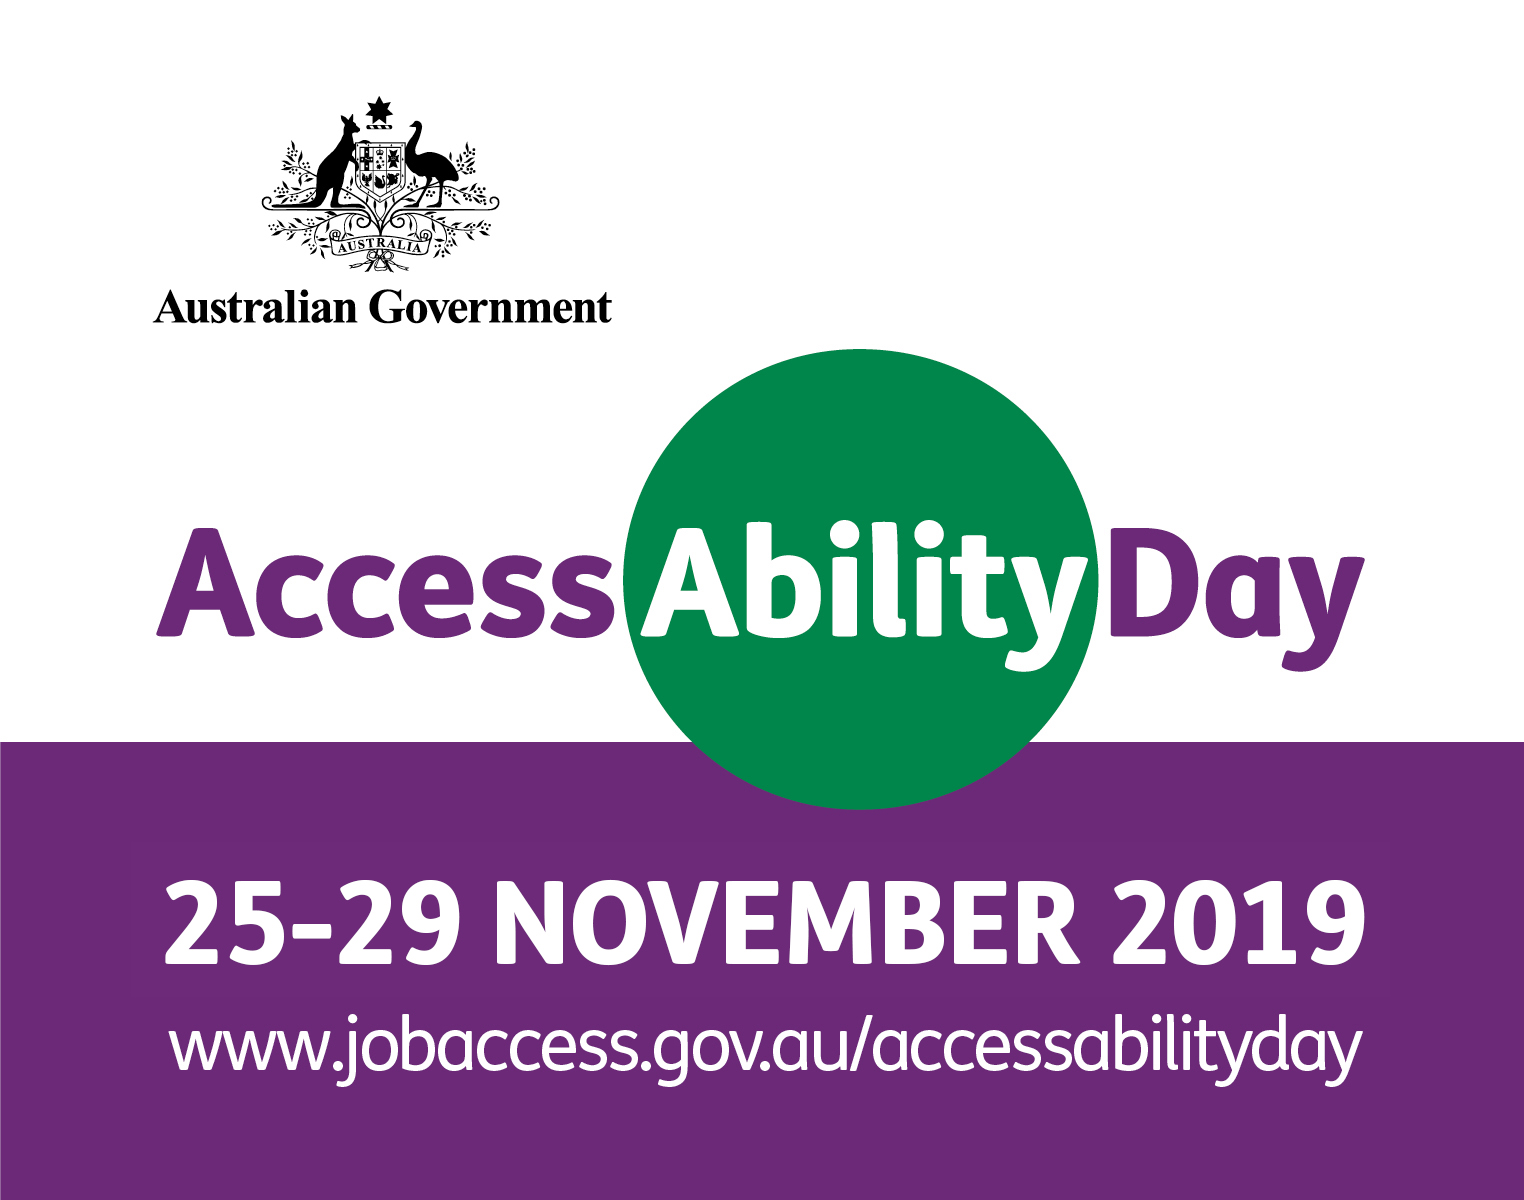 atWork Australia proudly participates in AccessAbility Day 2019